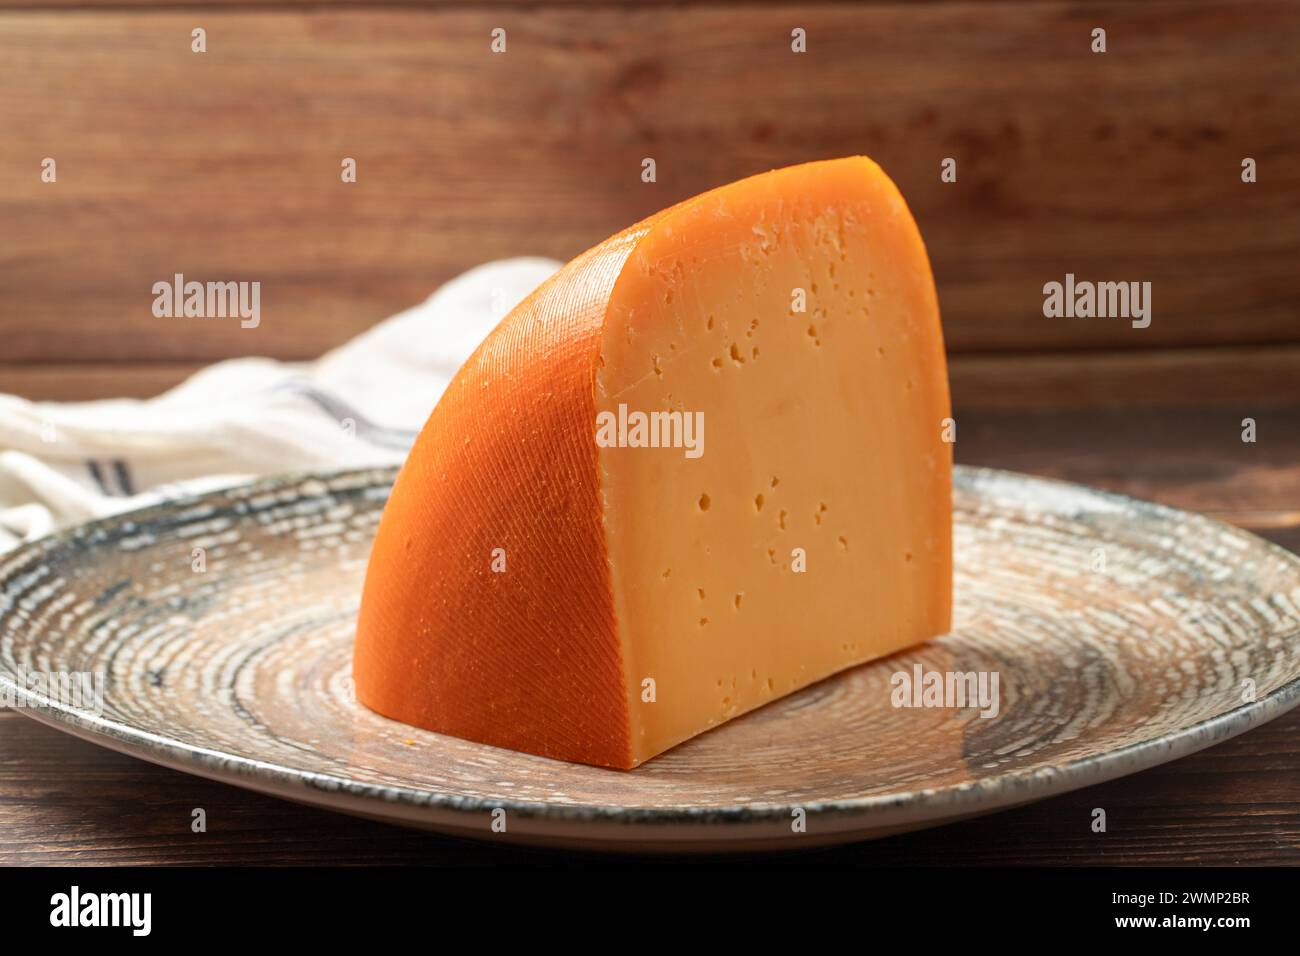 Mimolette cheese. Dairy products. Slices of Mimolette cheese on a plate Stock Photo